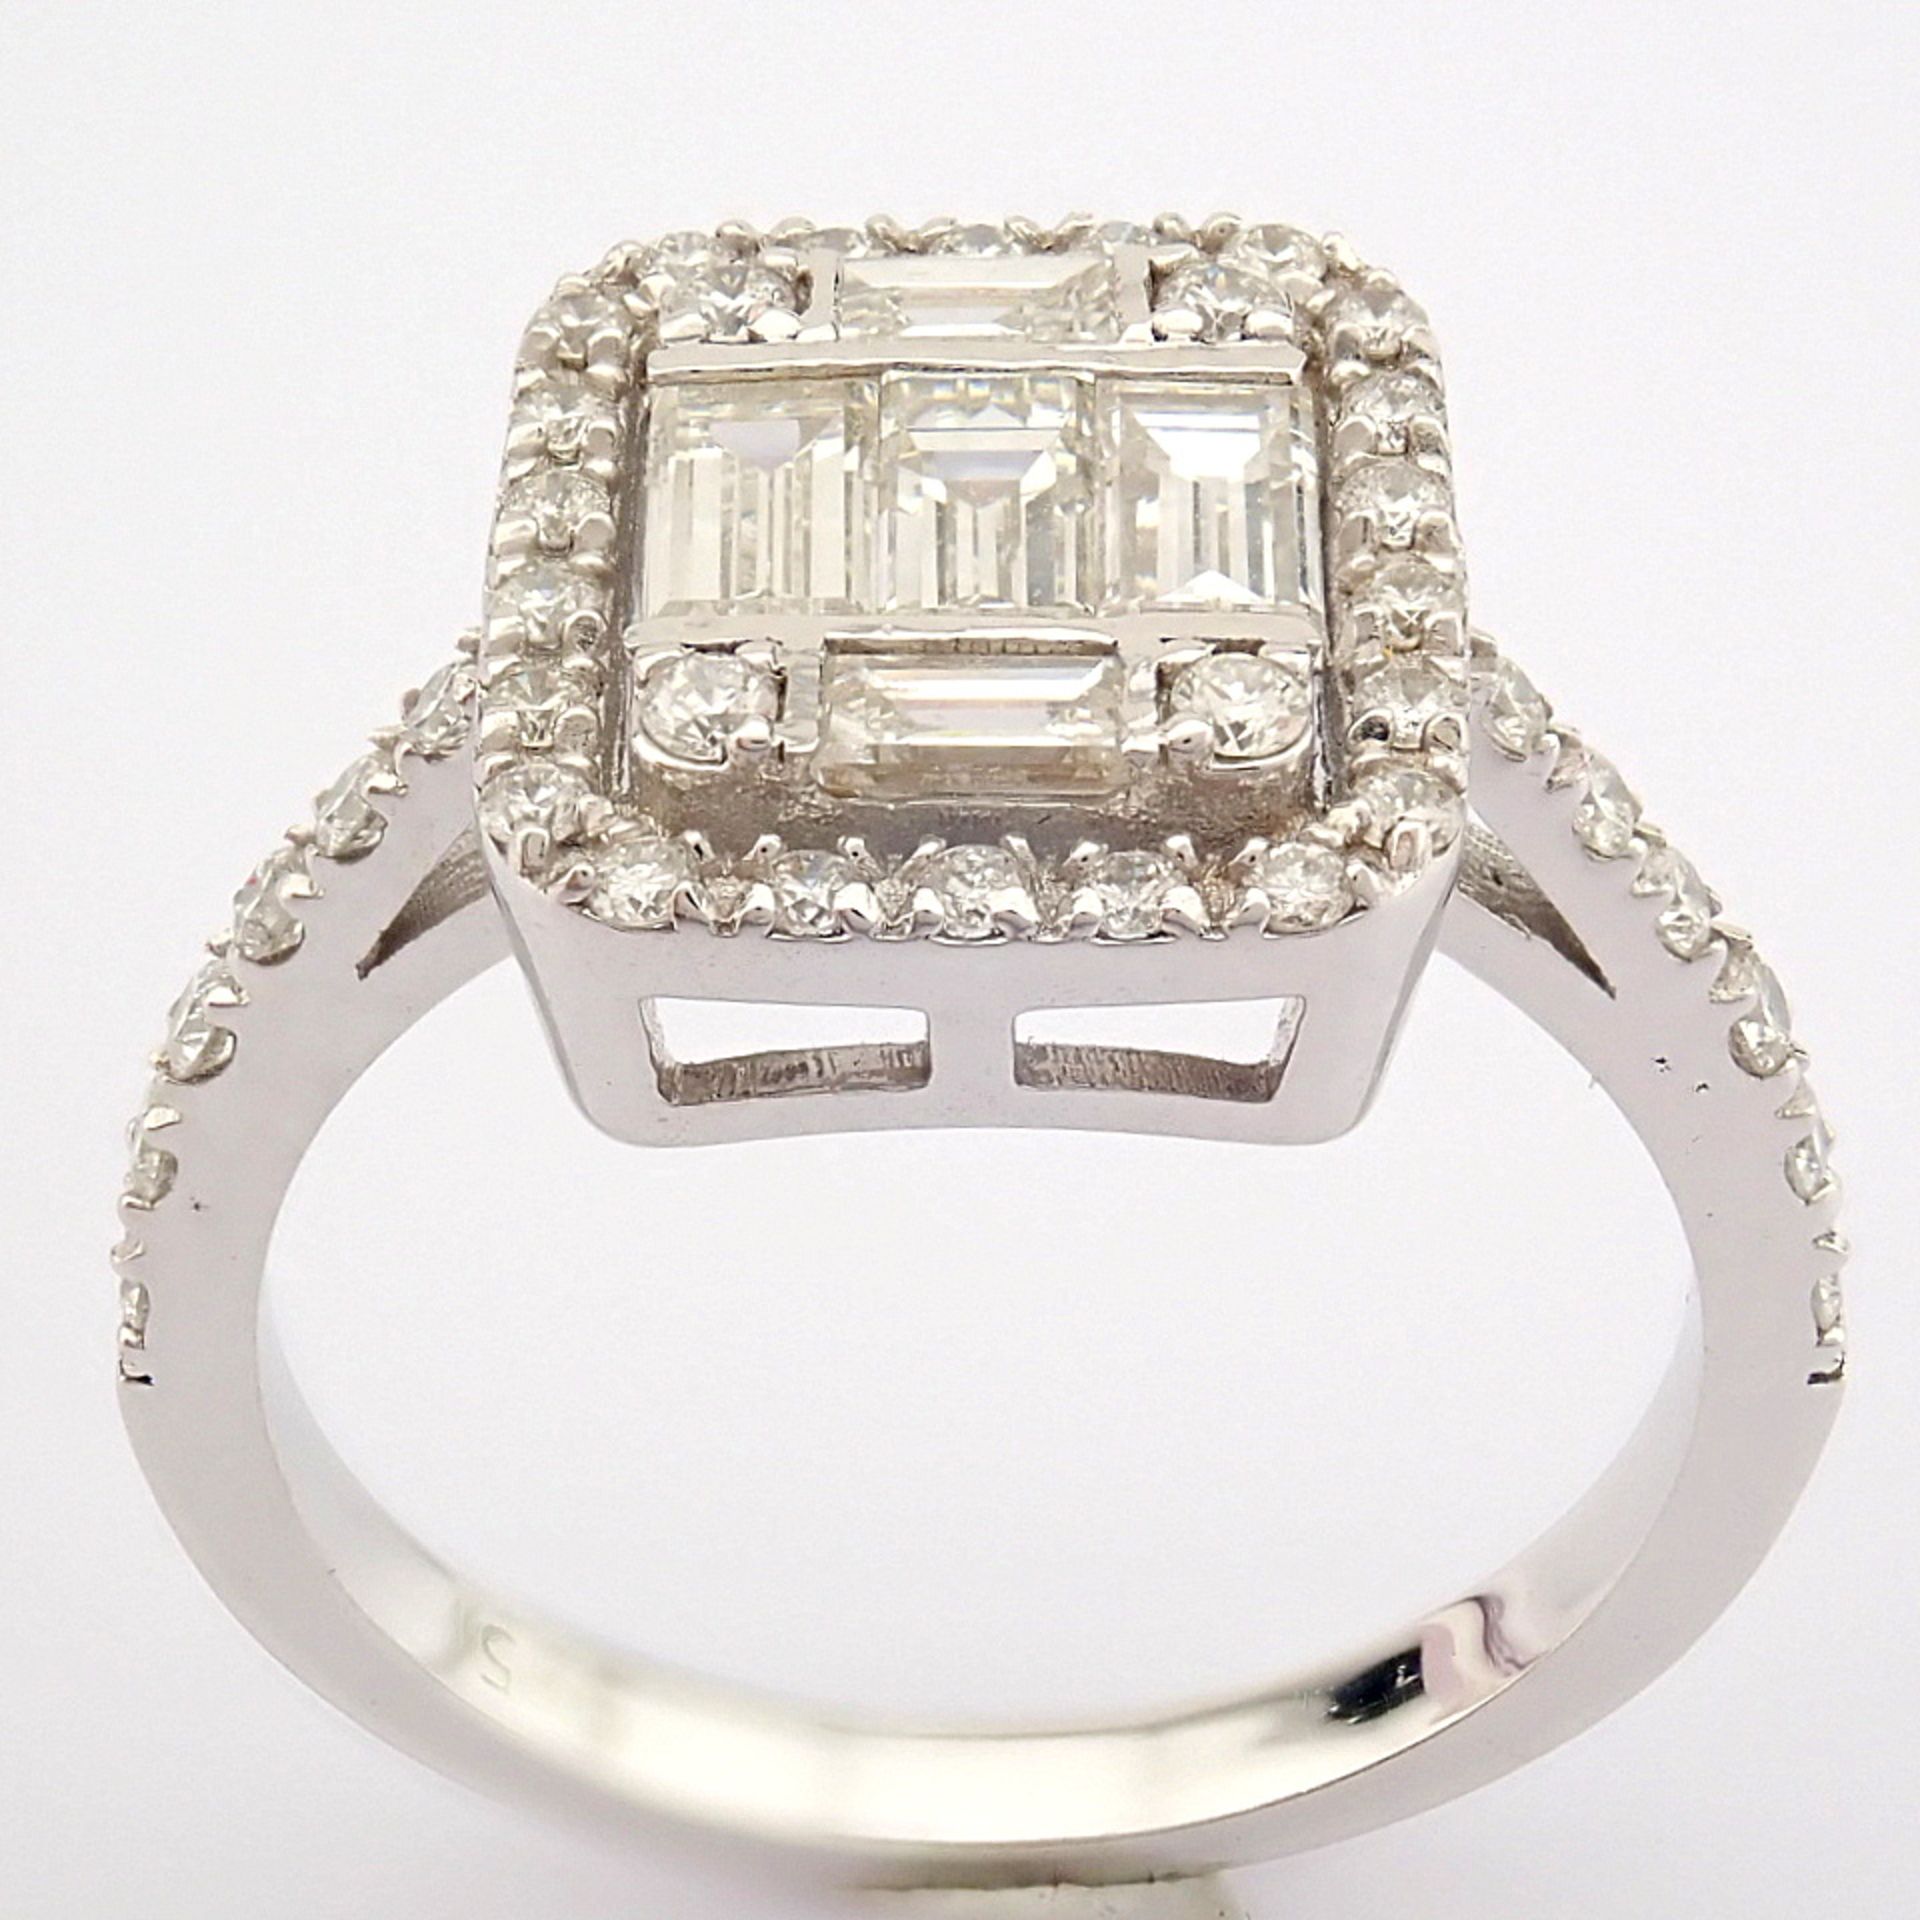 Certificated 14K White Gold Baguette Diamond & Diamond Ring (Total 1.11 ct Stone) - Image 12 of 14